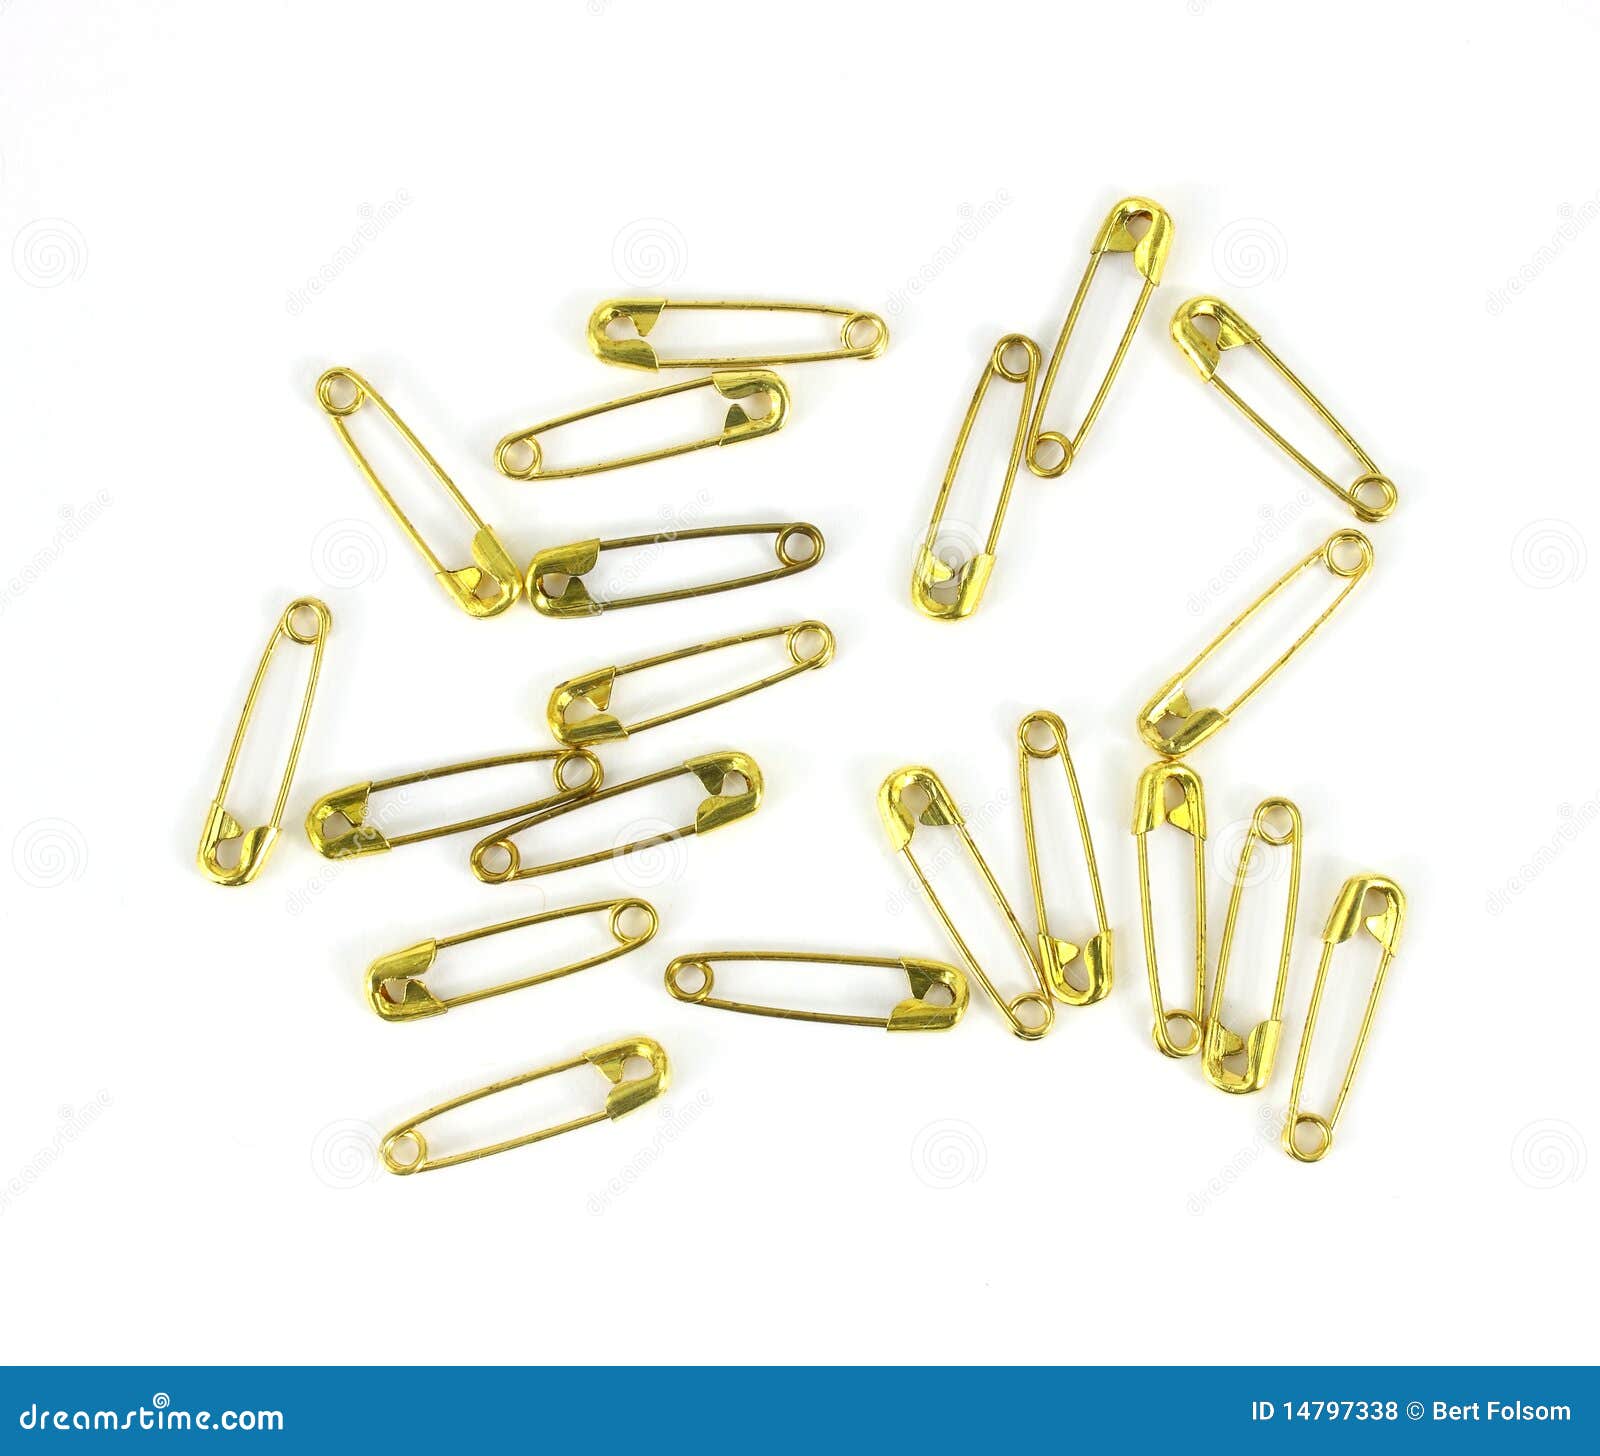 Assortment of safety pins stock photo. Image of clothing - 14797338